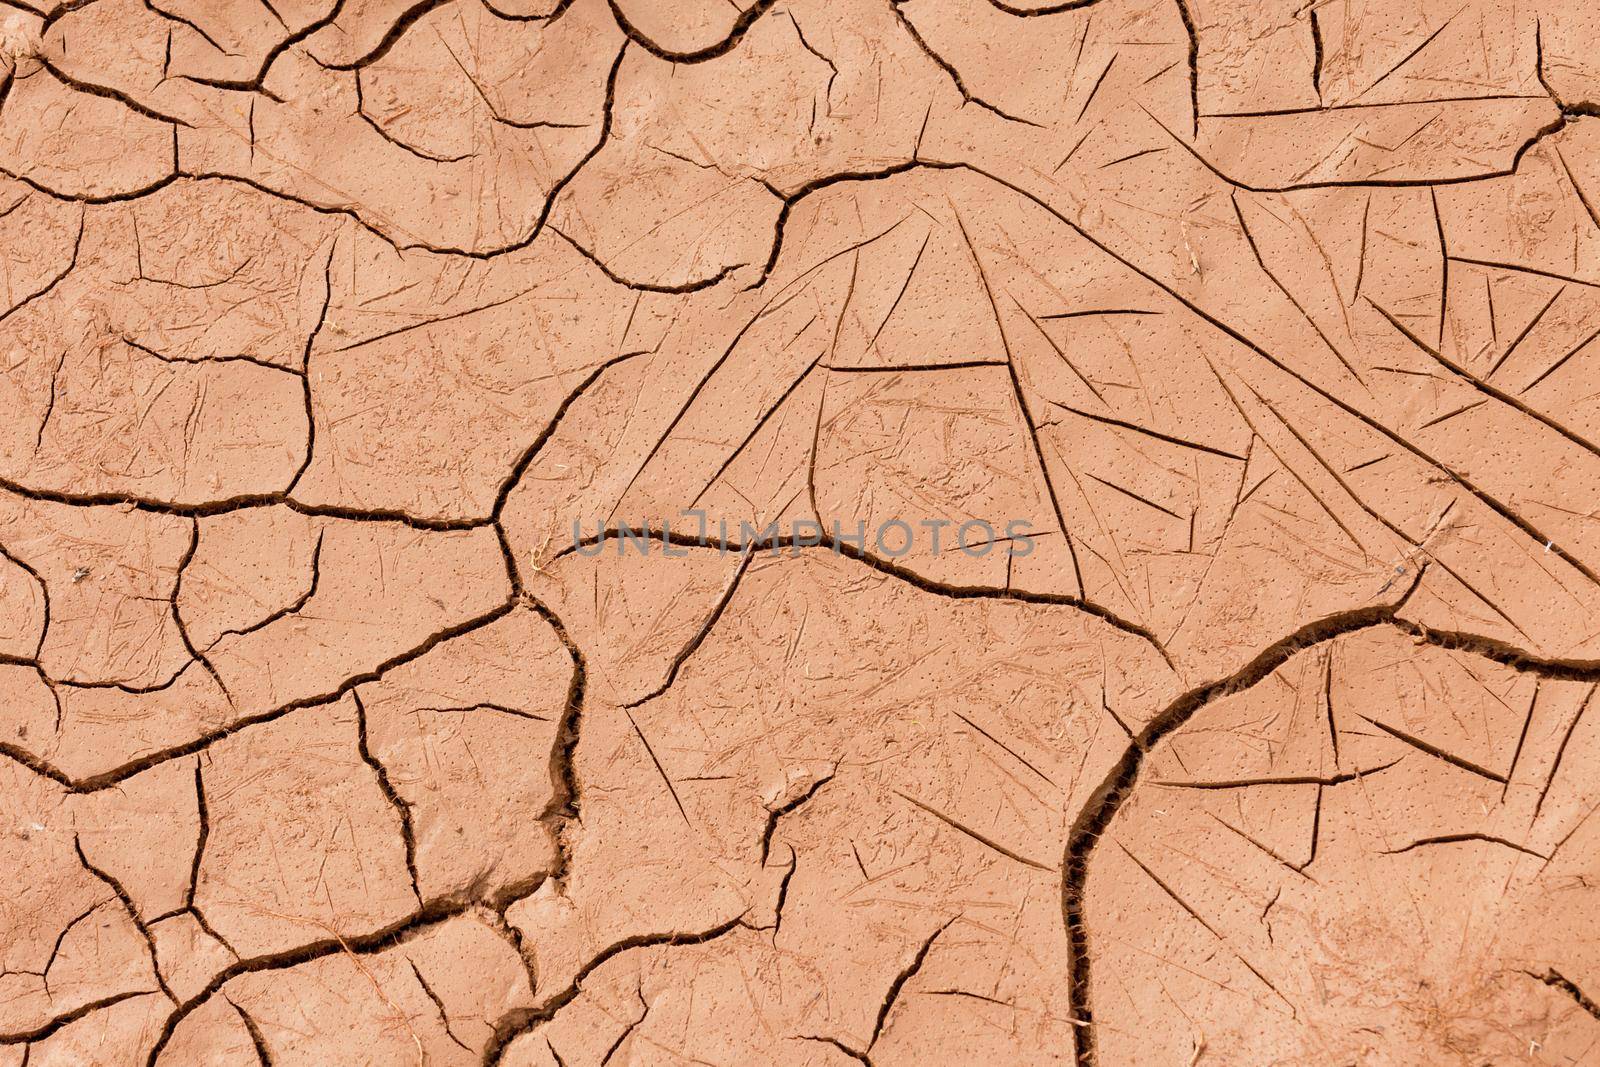 Cracked dry earth drought concept background by PiLens